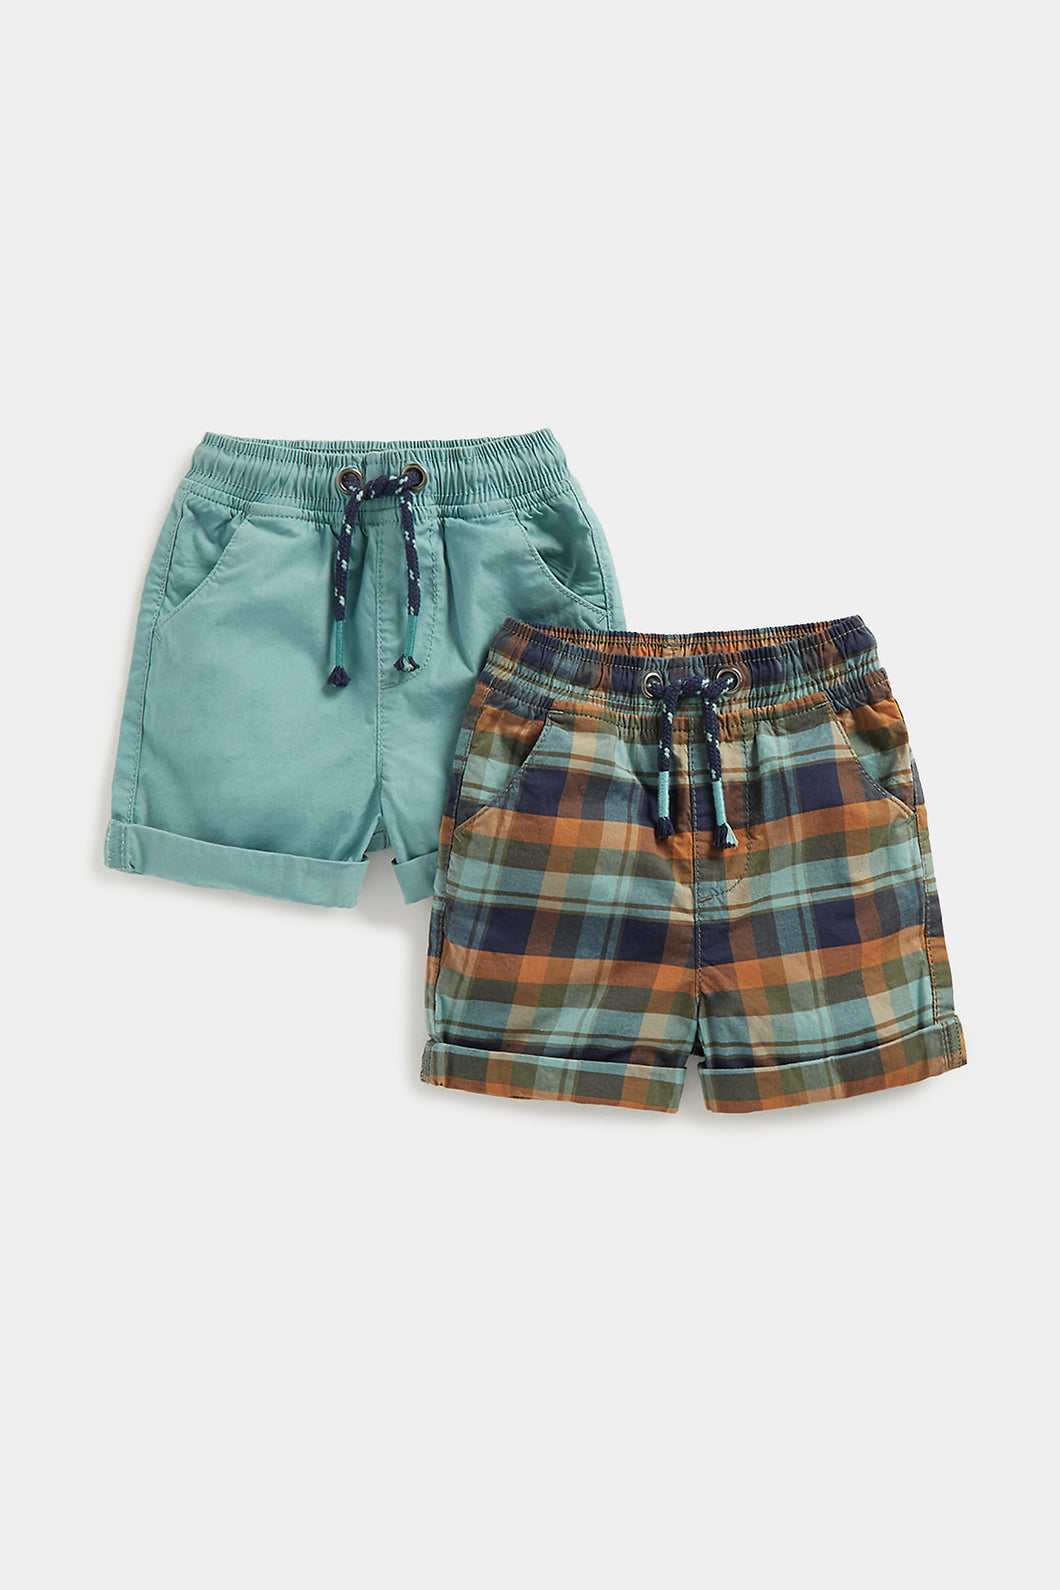 Mothercare Blue and Check Shorts - 2 Pack